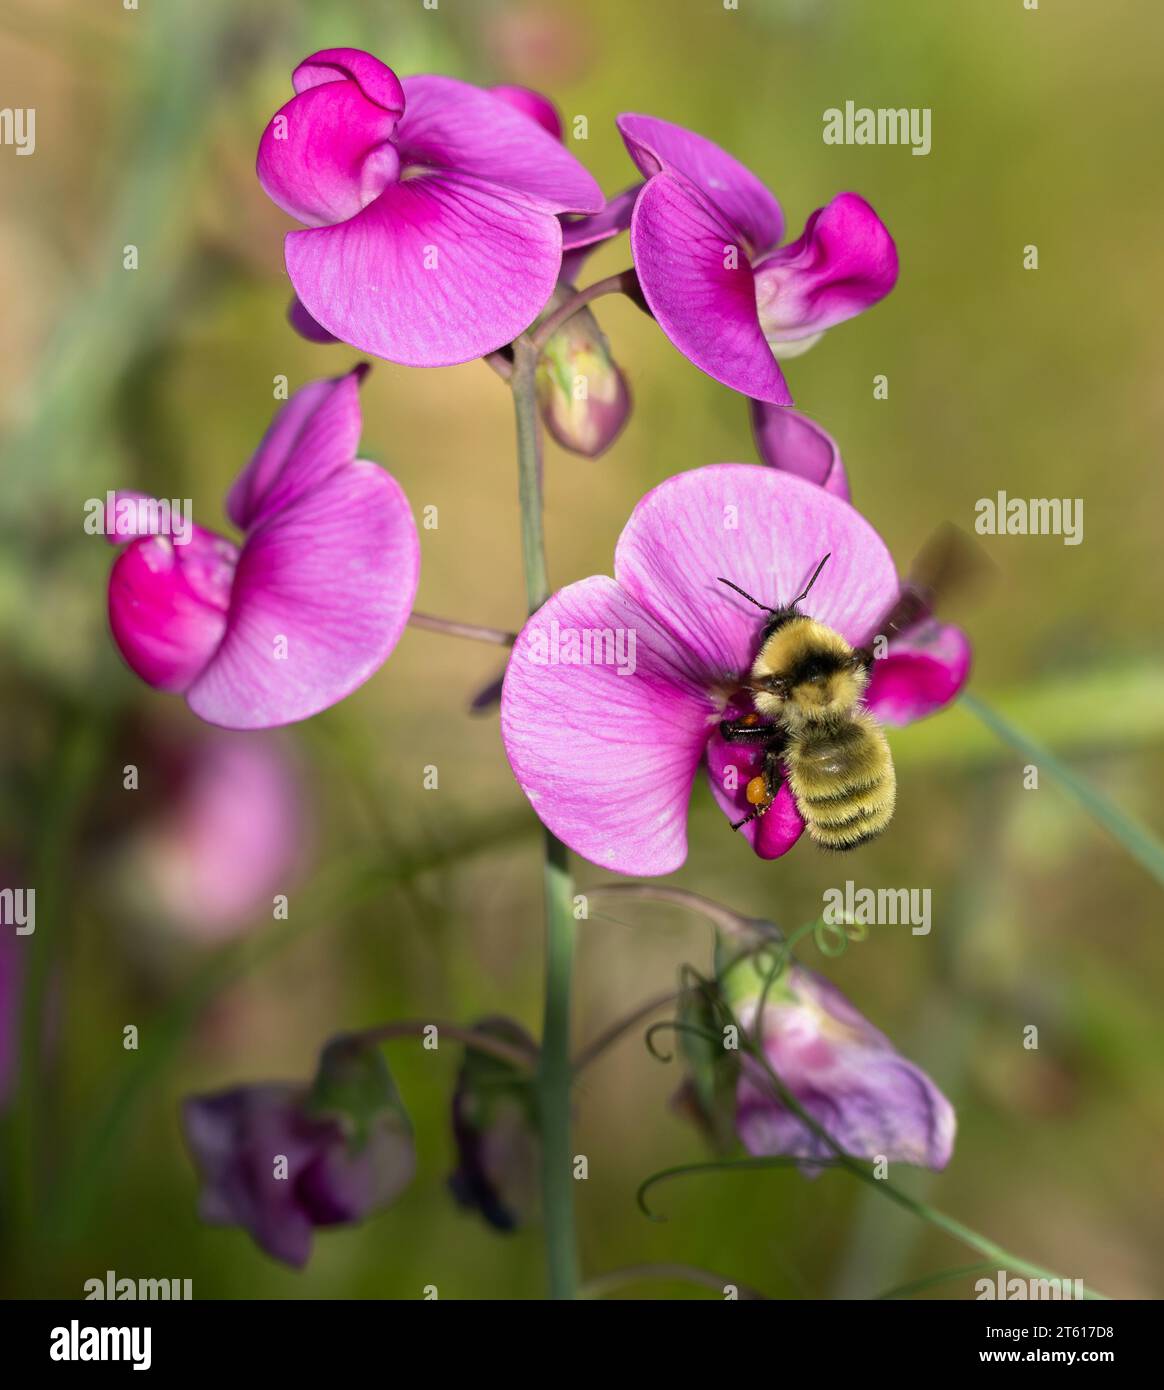 A large Bumblebee hovering over Sweet Pea flowers of a beautiful pink color, getting ready to pollinate. Stock Photo